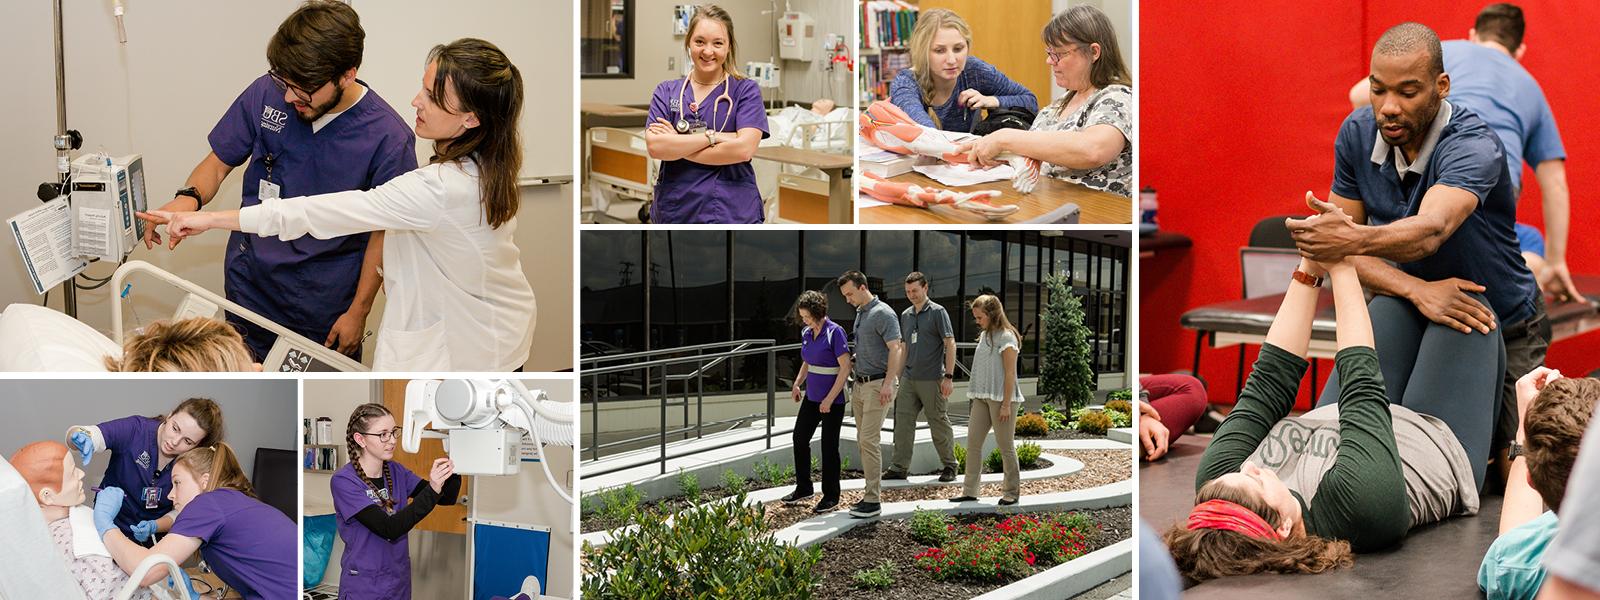 collage of photos of nursing, physical therapy, and radiography students at work